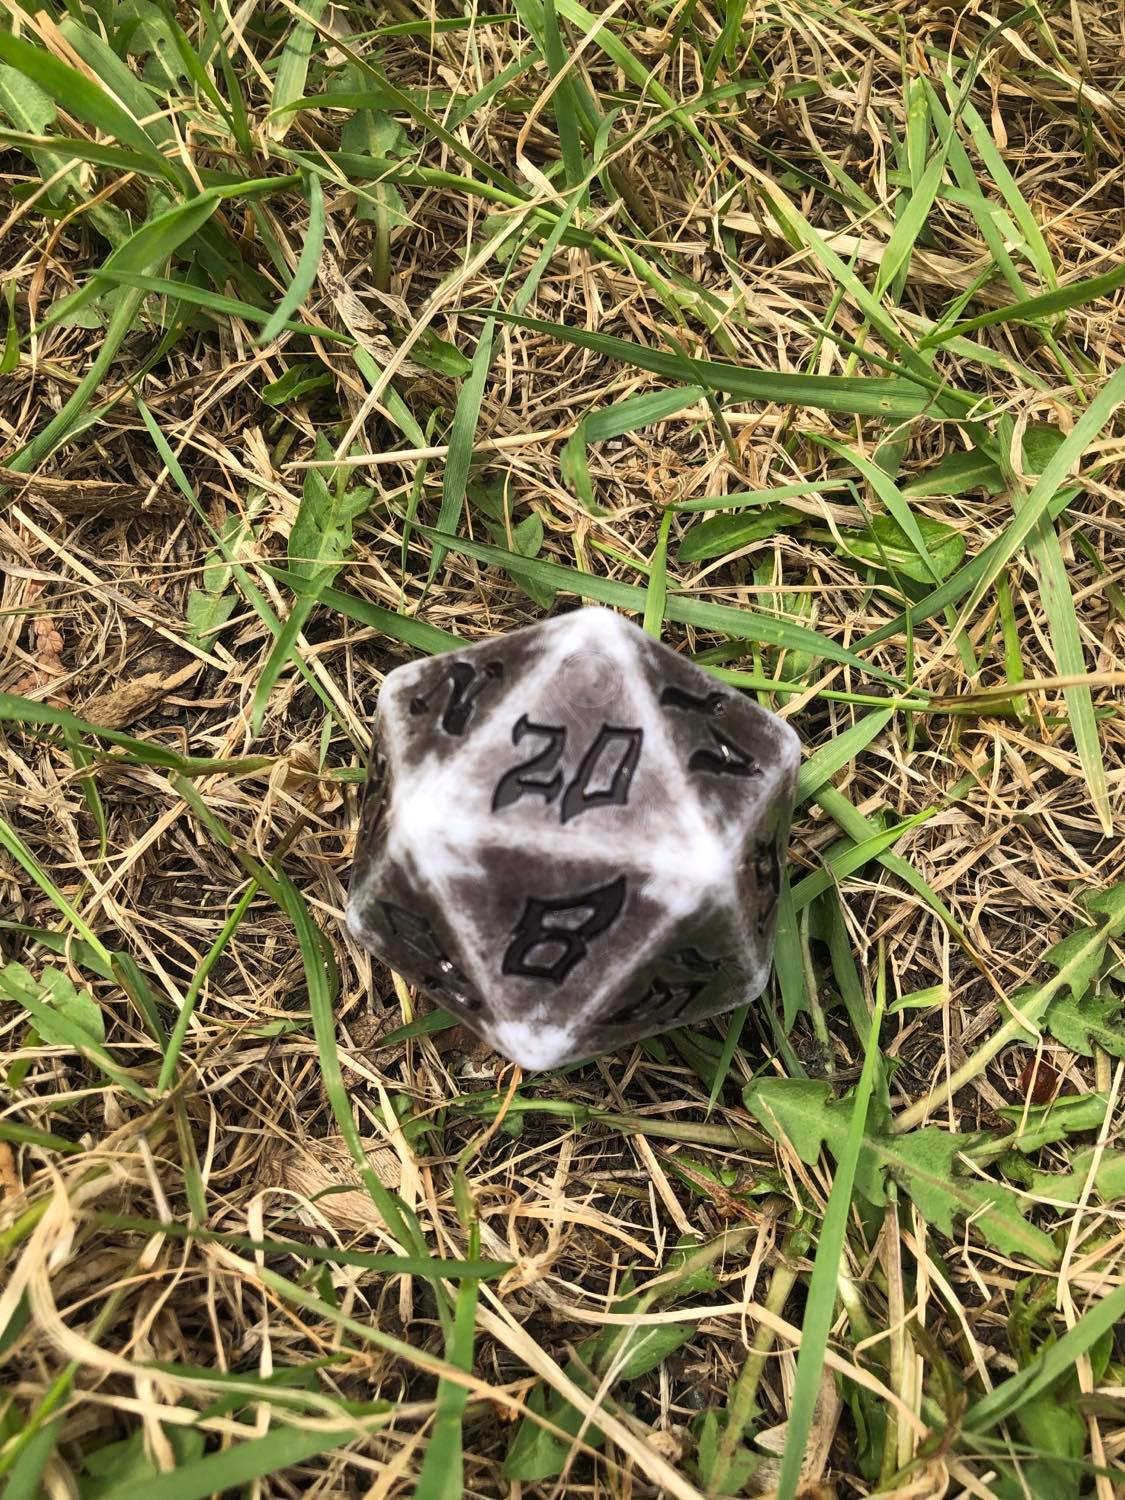 The giant dice, dark grey to light grey edges, somewhat mottled, with the 20 facing up, and it's sitting in the spring grass.